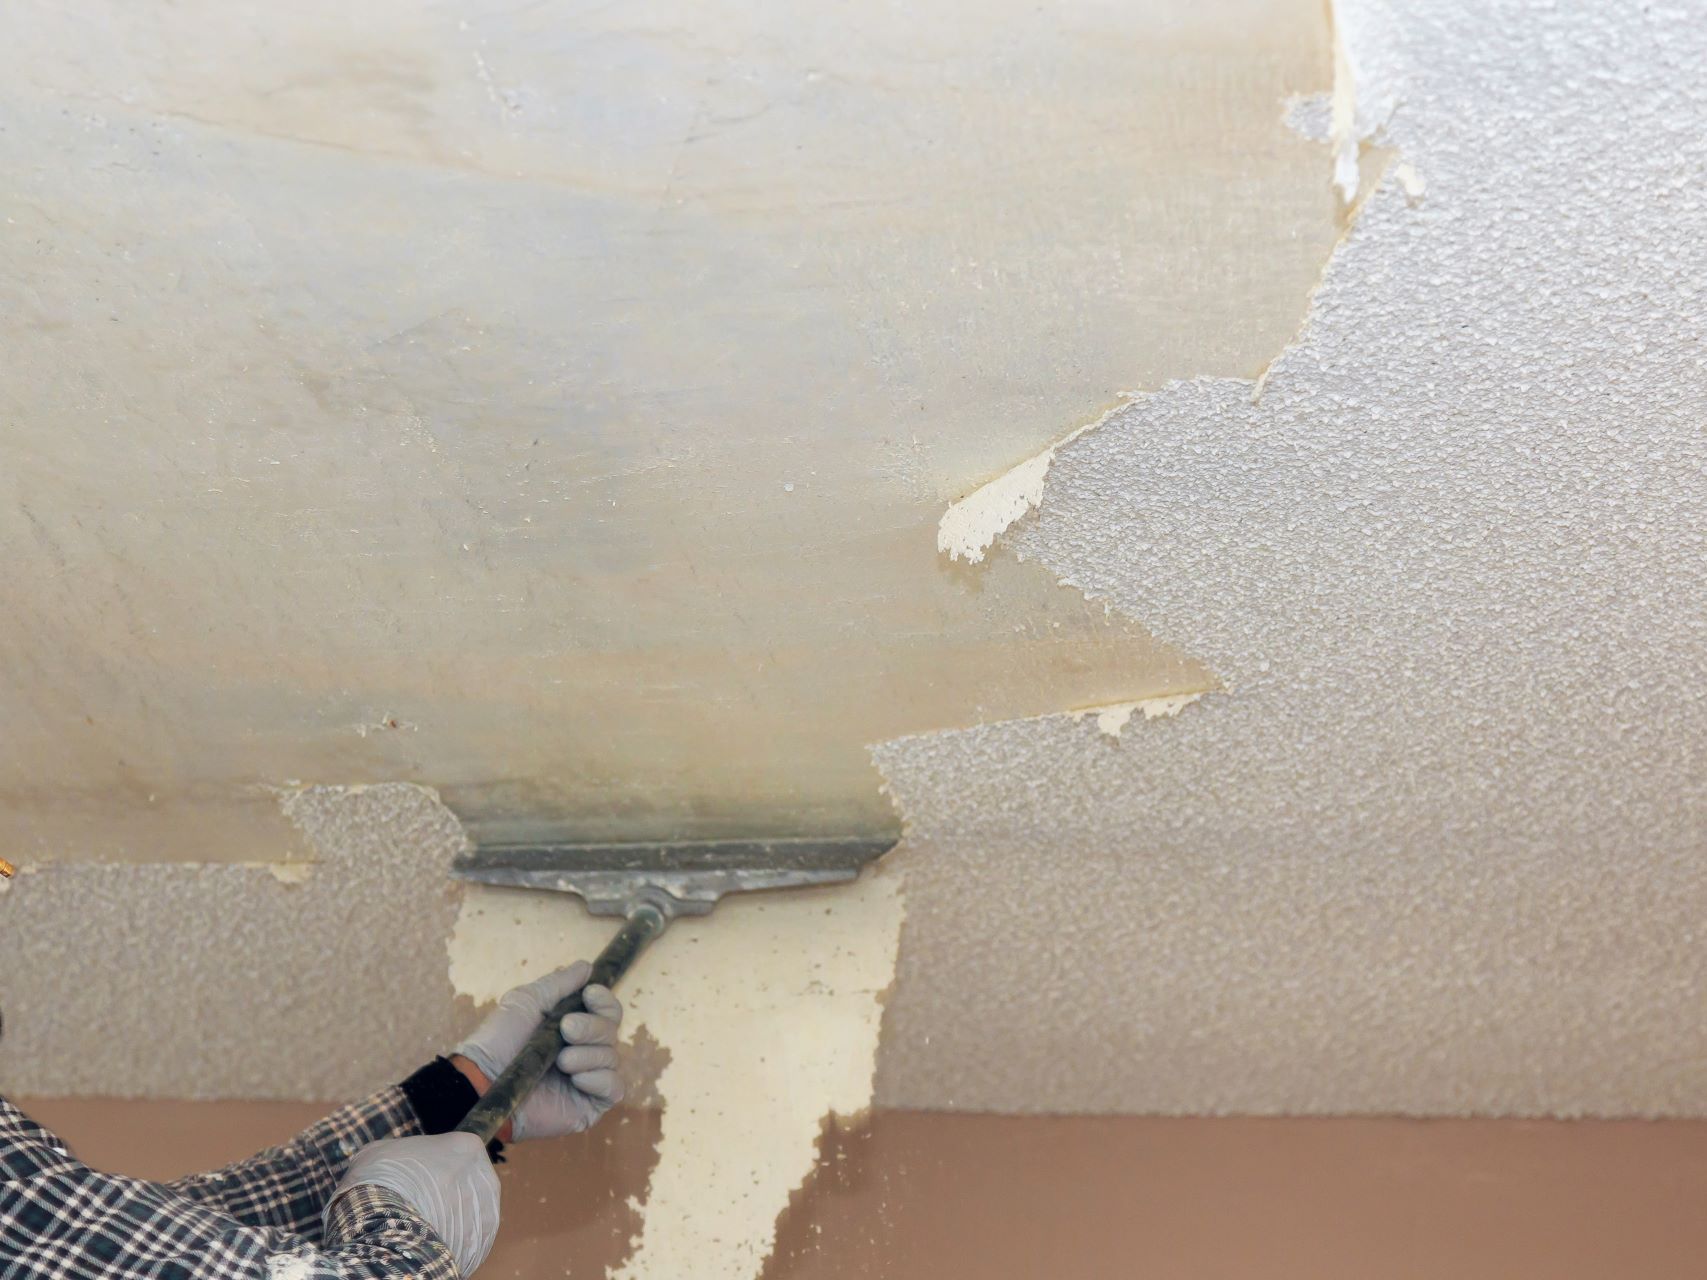 A person is removing wallpaper from a ceiling with a spatula.